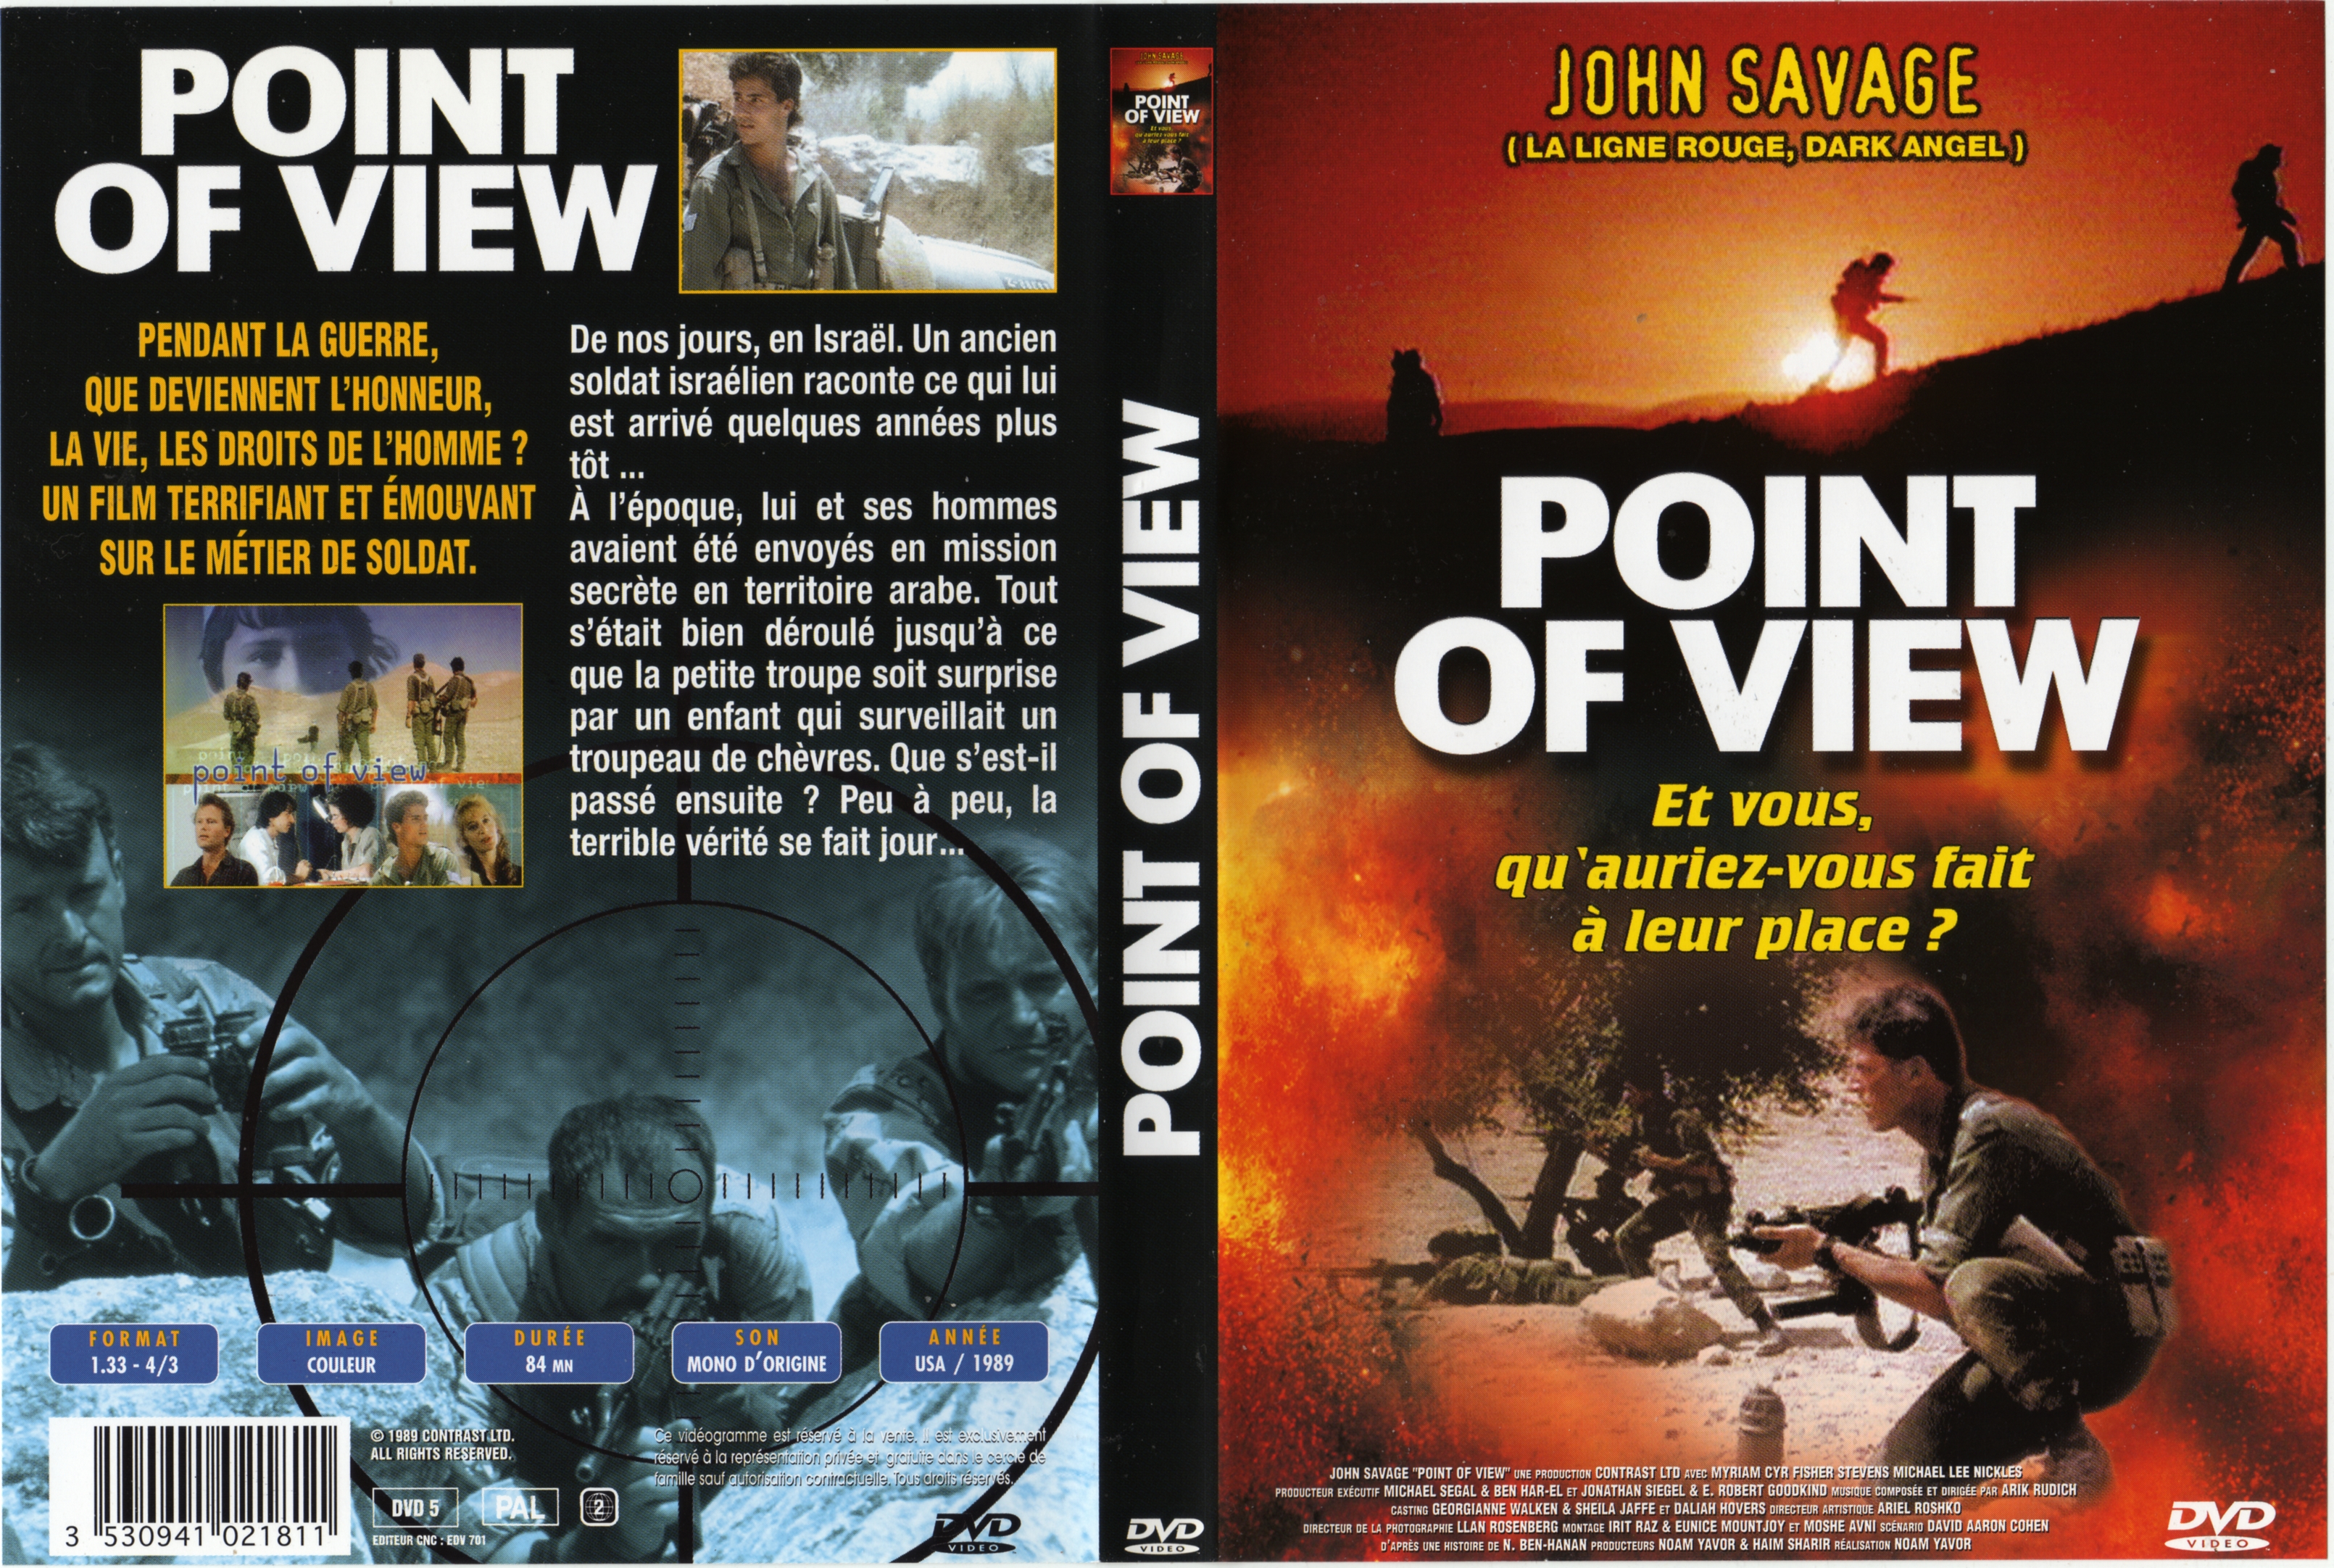 Jaquette DVD Point of view